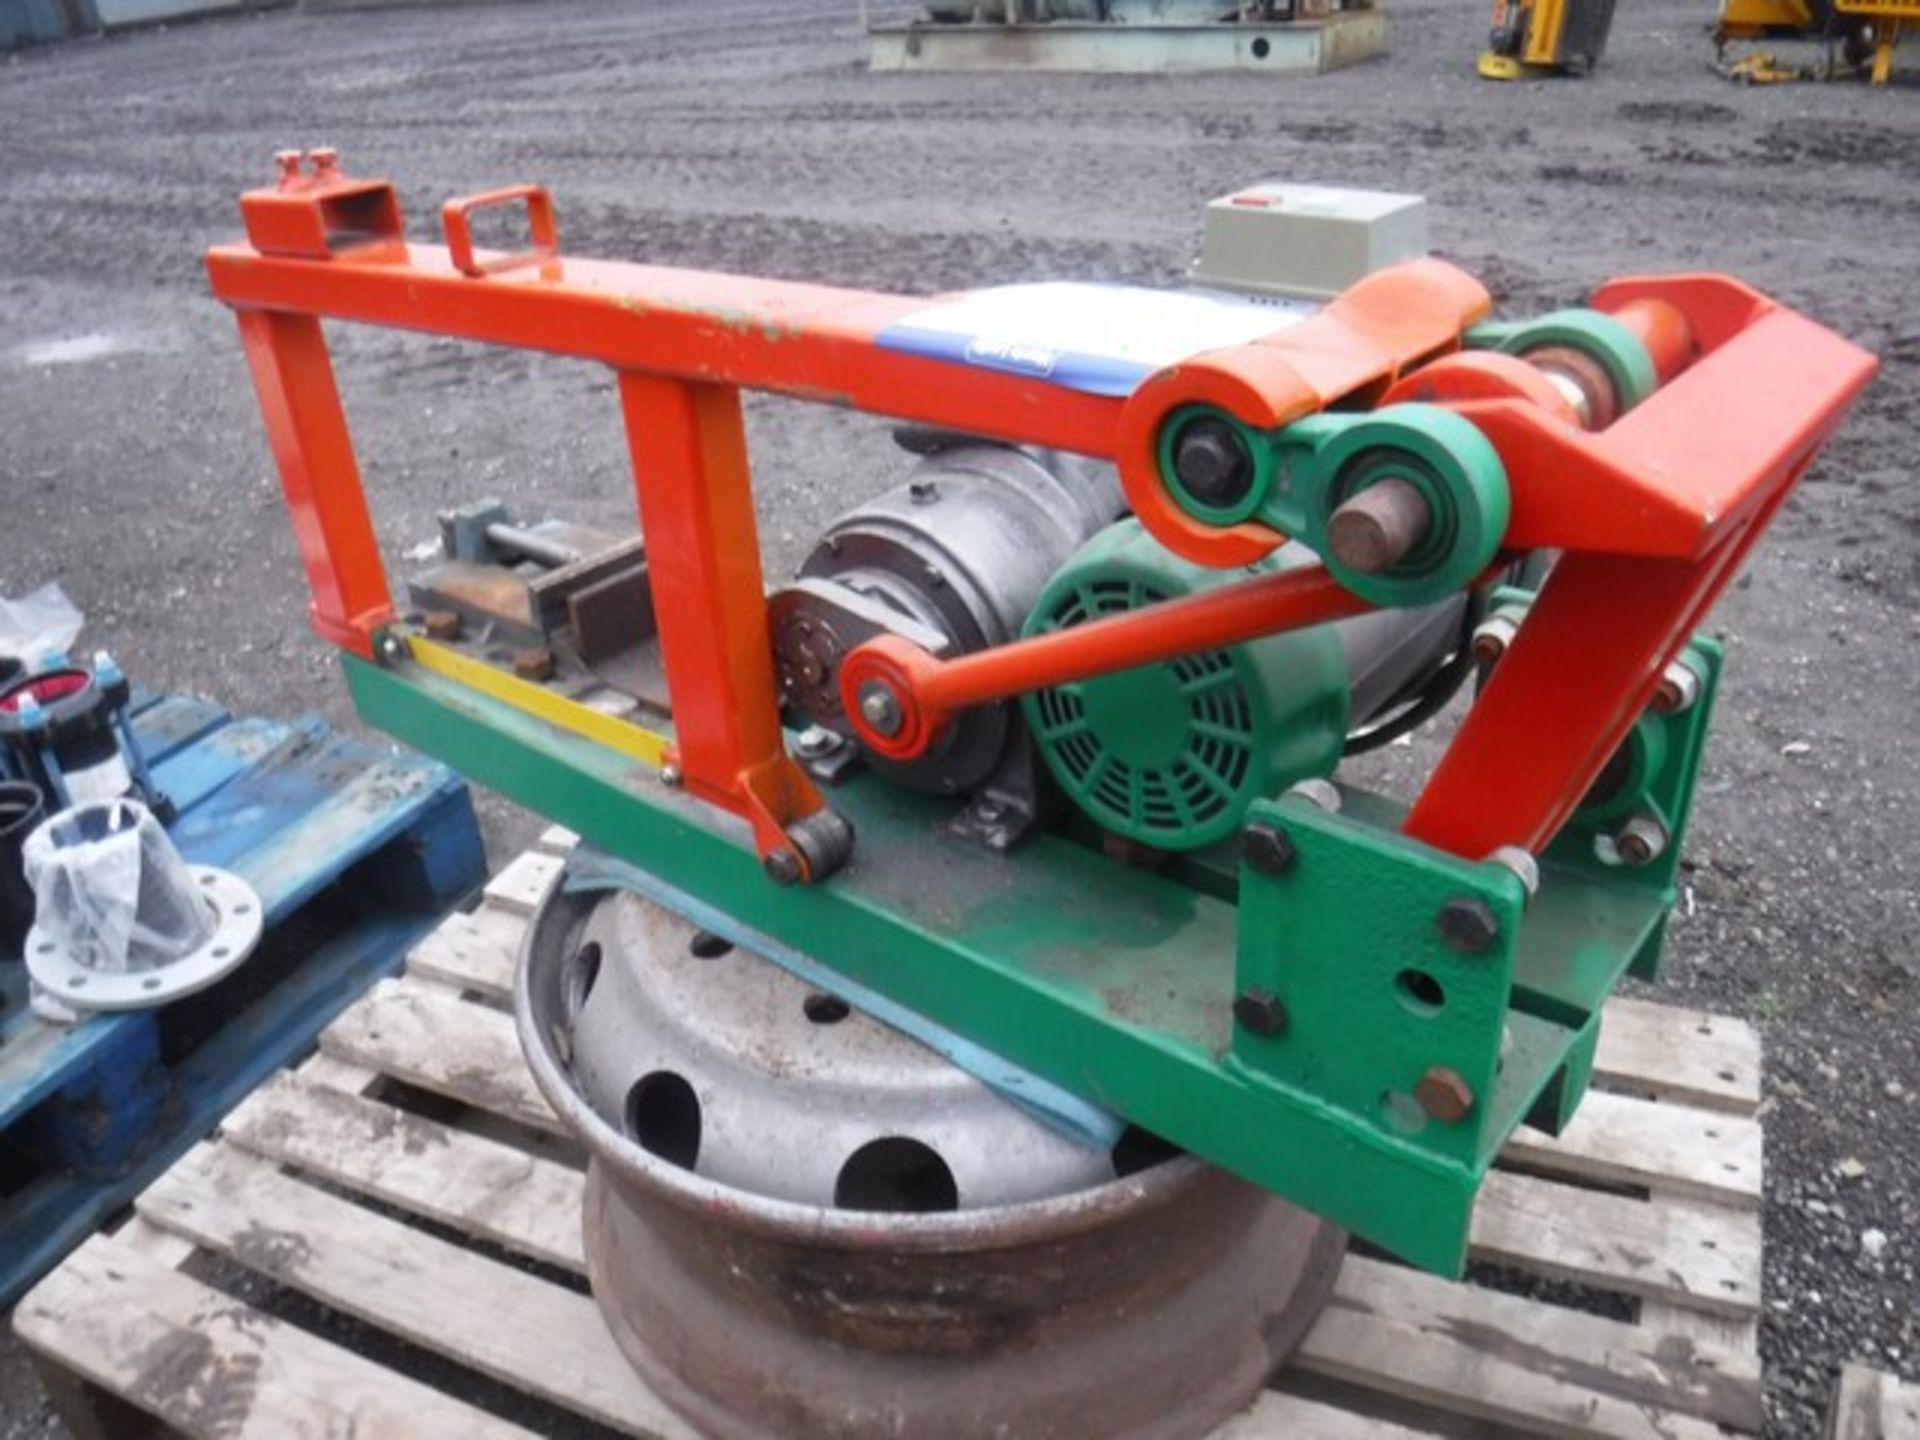 SWIVEL THREE PHASE INDUSTRIAL METAL SAW C/W STAND - Image 5 of 7